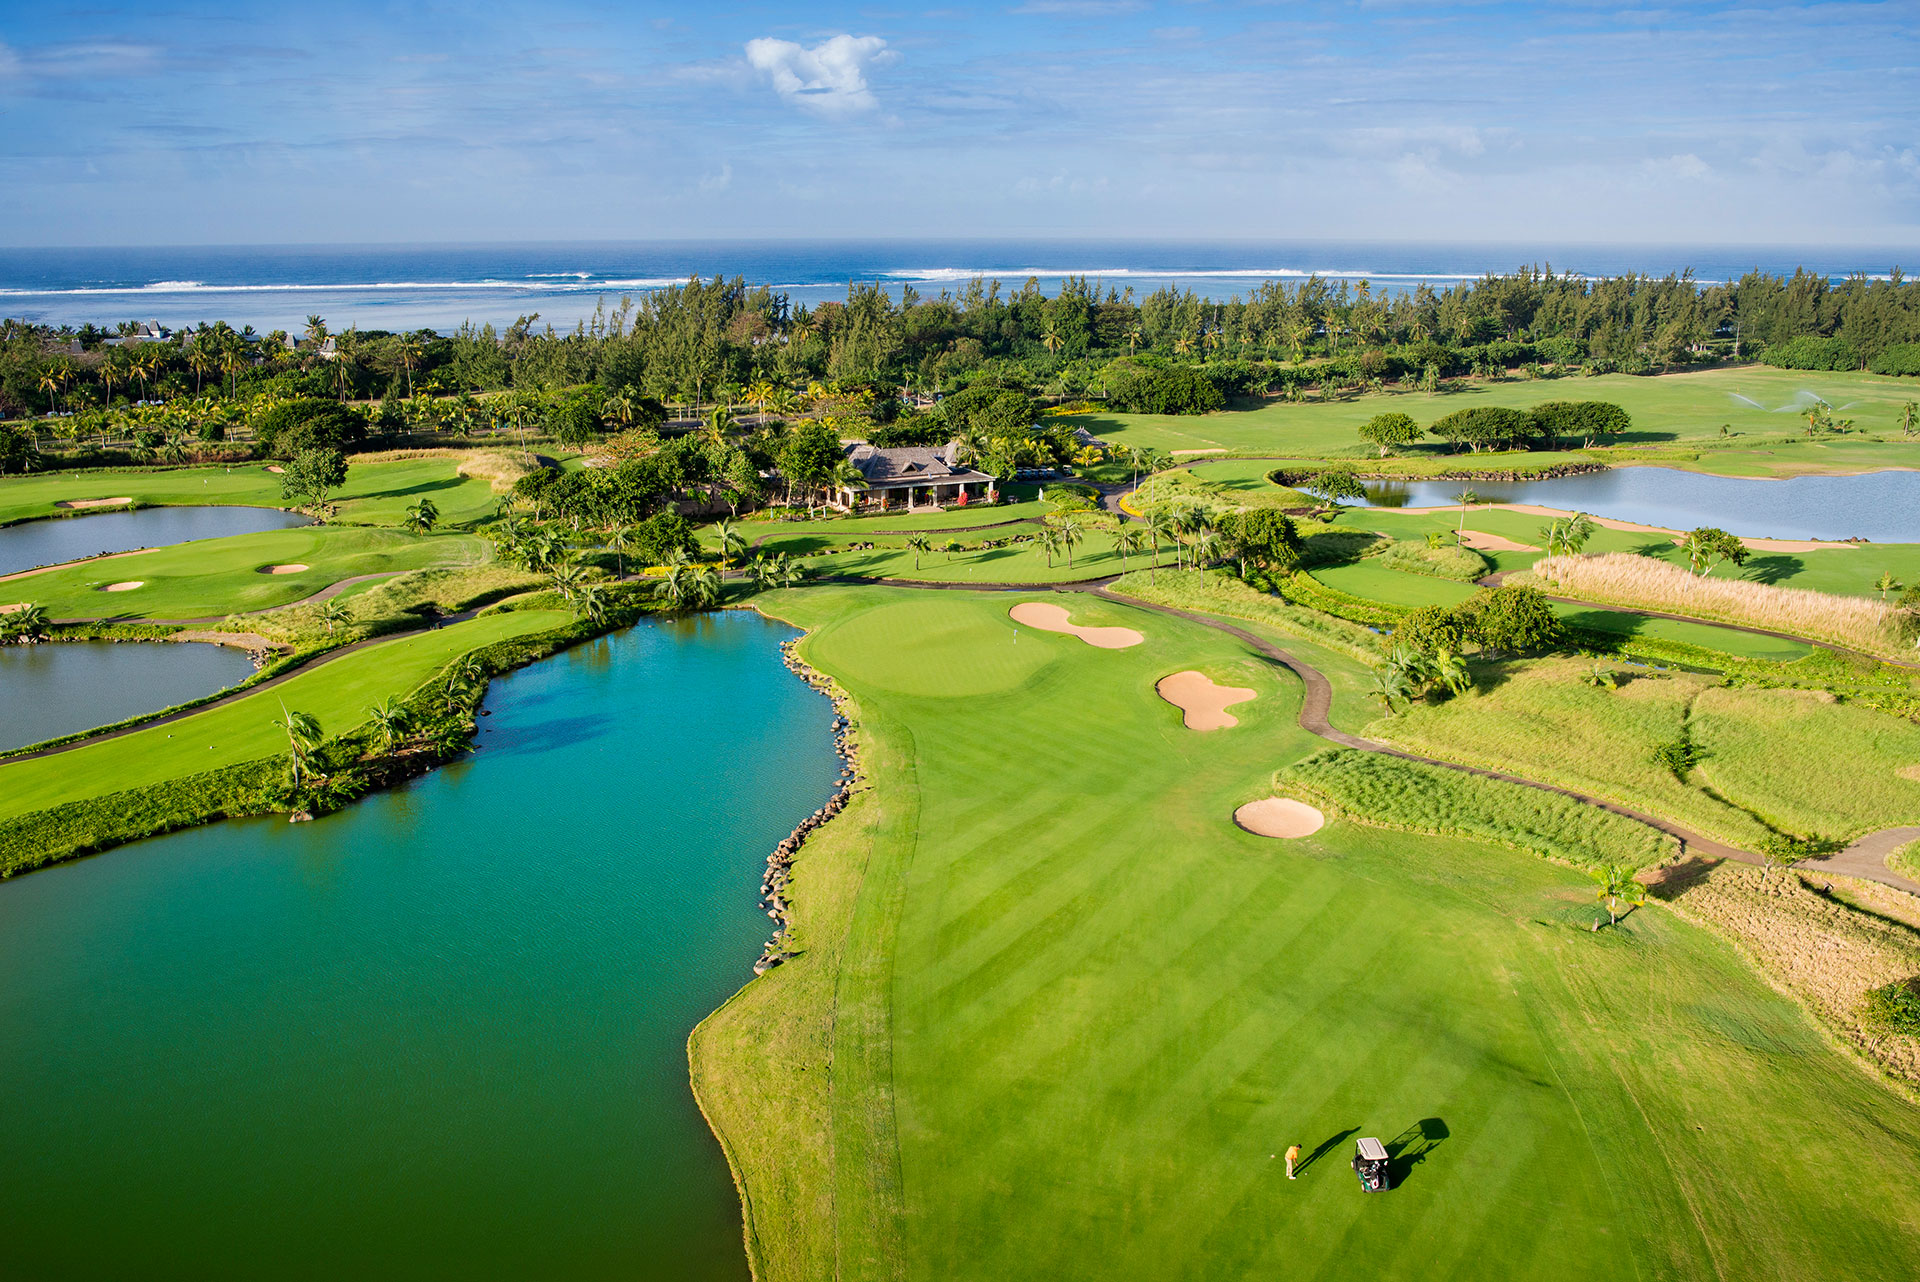 Mauritius hotels with golf courses | Heritage Golf Club - Mauritius ...